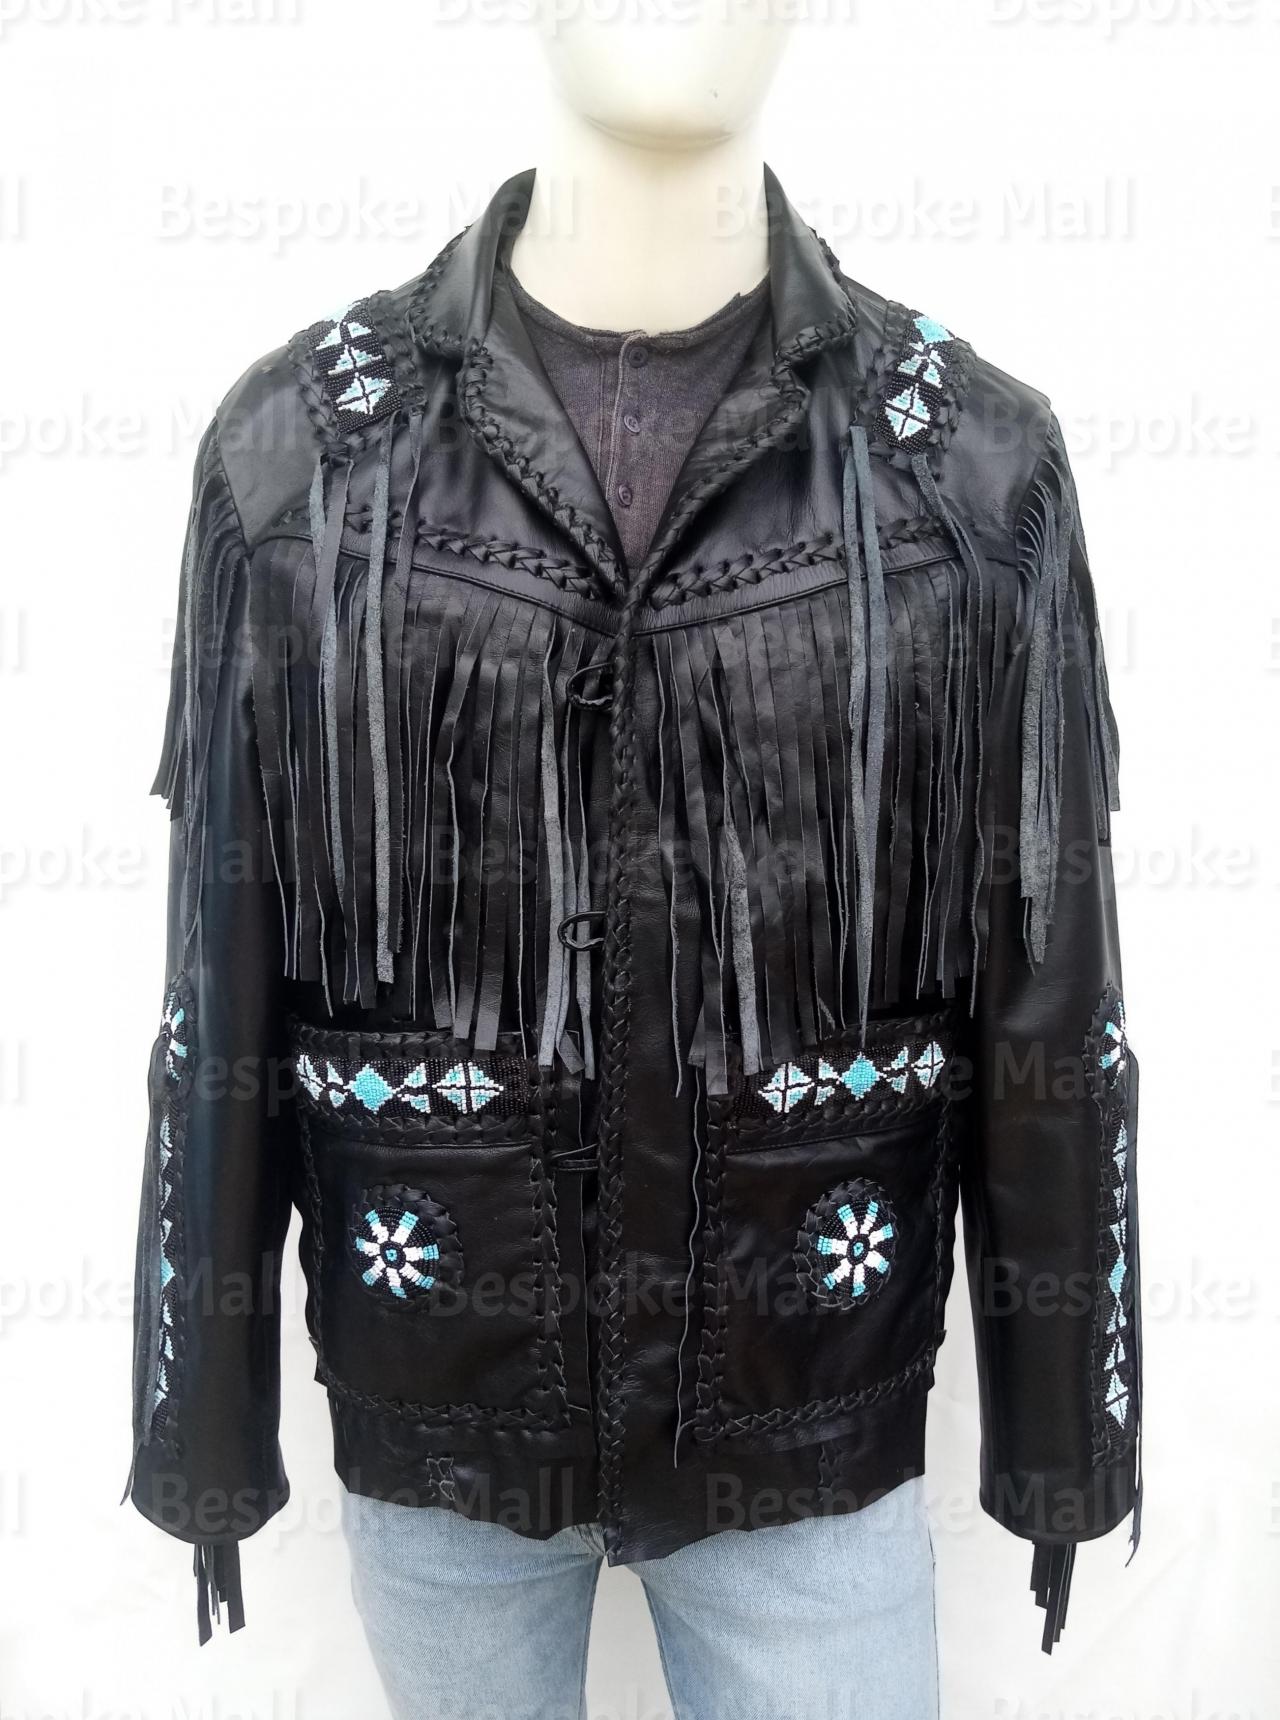 Handmade Men Black Western Wear Fringes Beads Patches Cowhide Leather Jacket-46